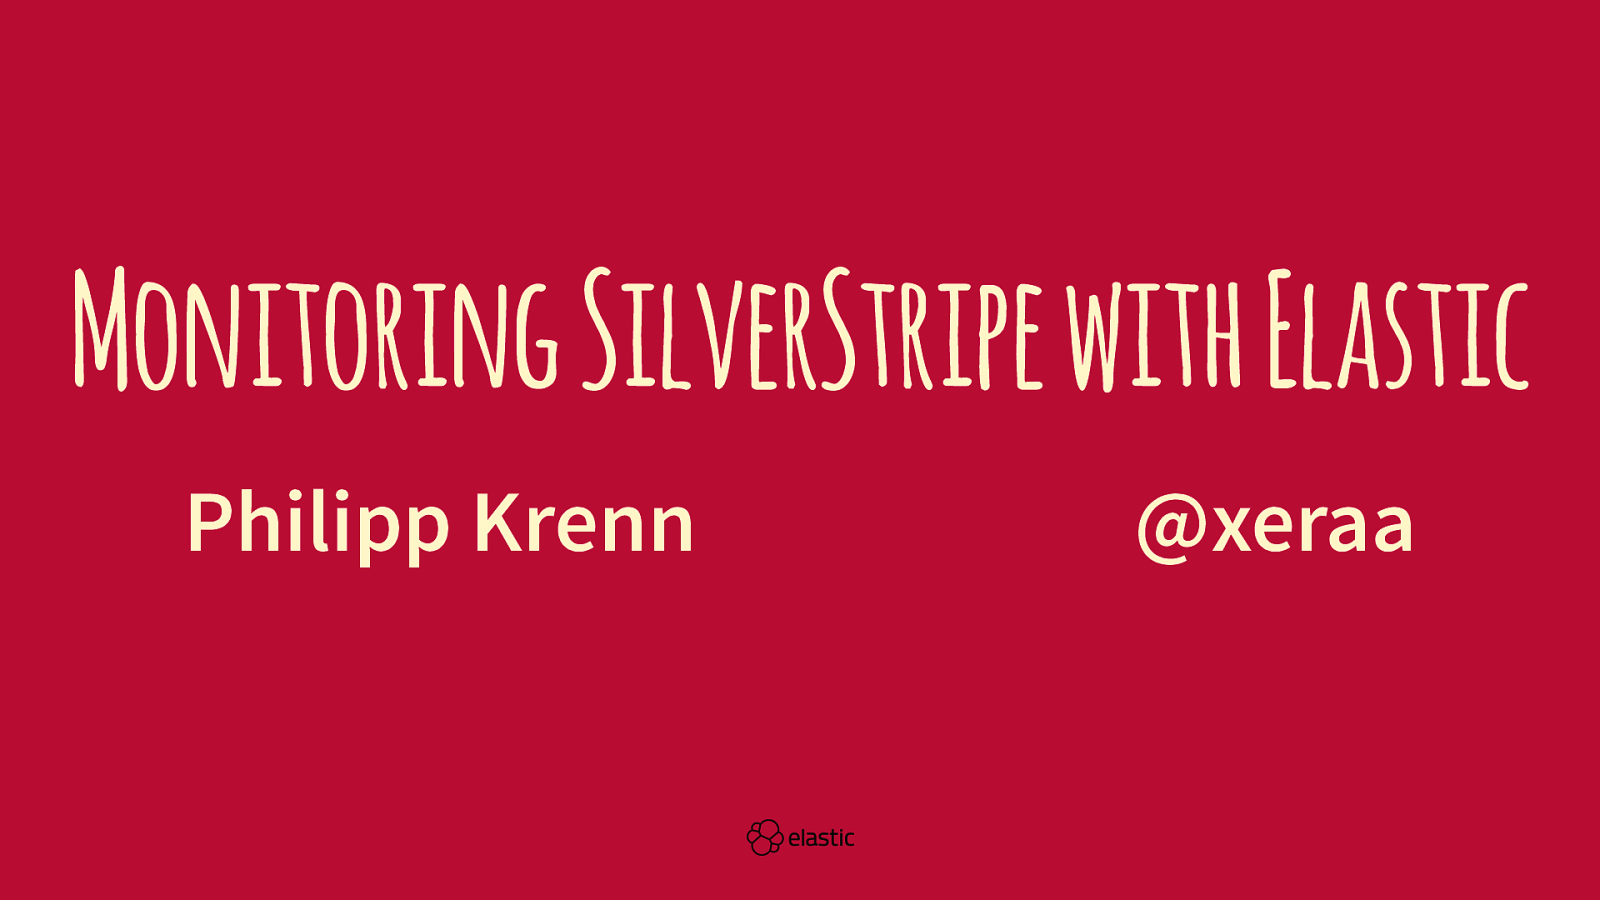 Monitoring SilverStripe with Elastic